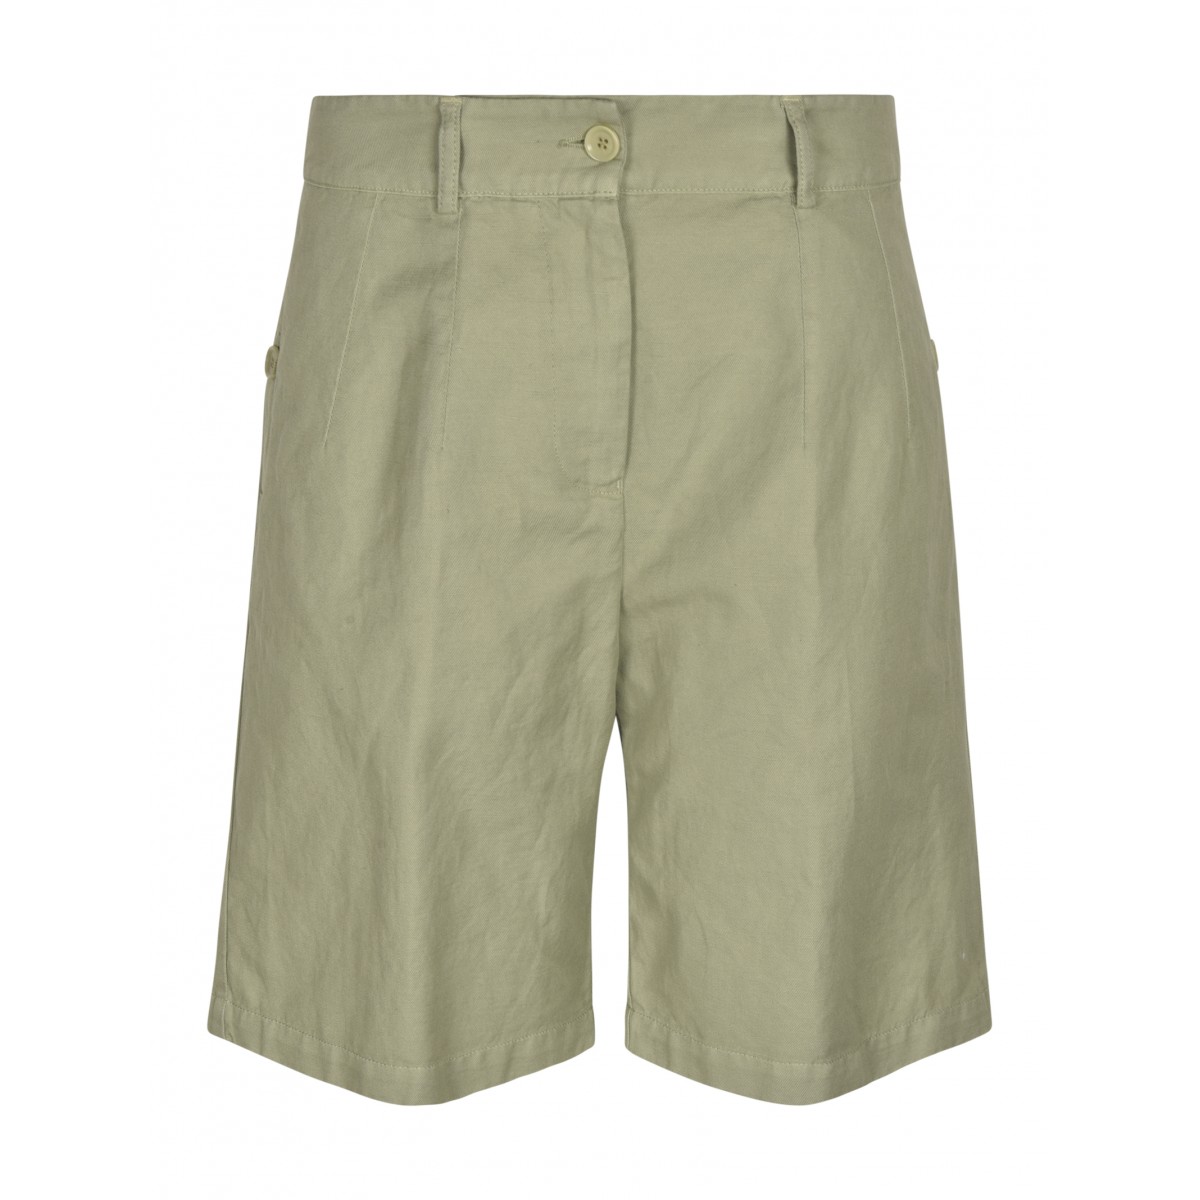 Minty Green cotton and linen shorts